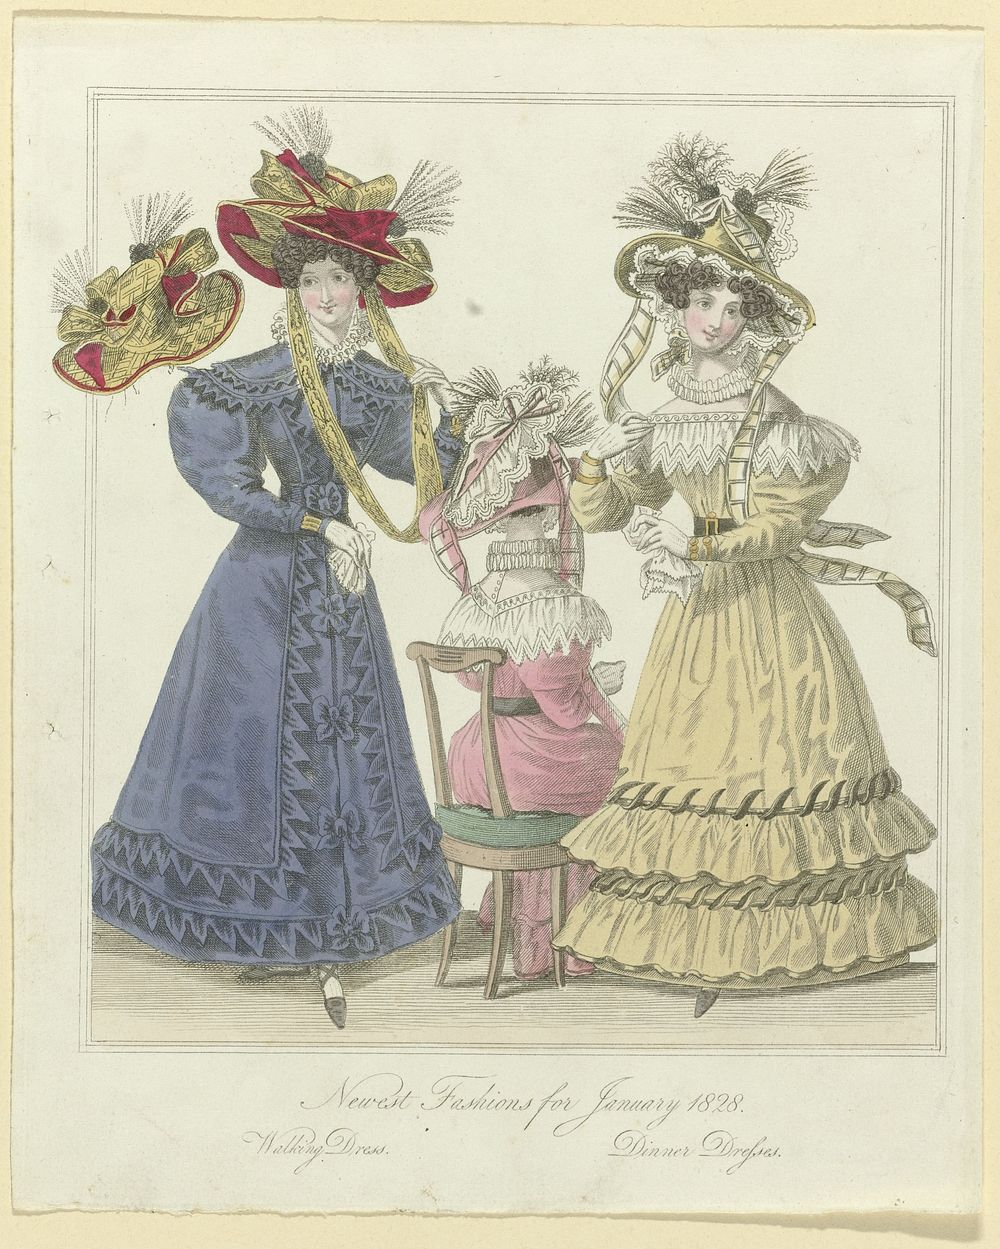 The World of Fashion, Newest Fashions for January 1828 : Walking dress (...) (1828) by anonymous